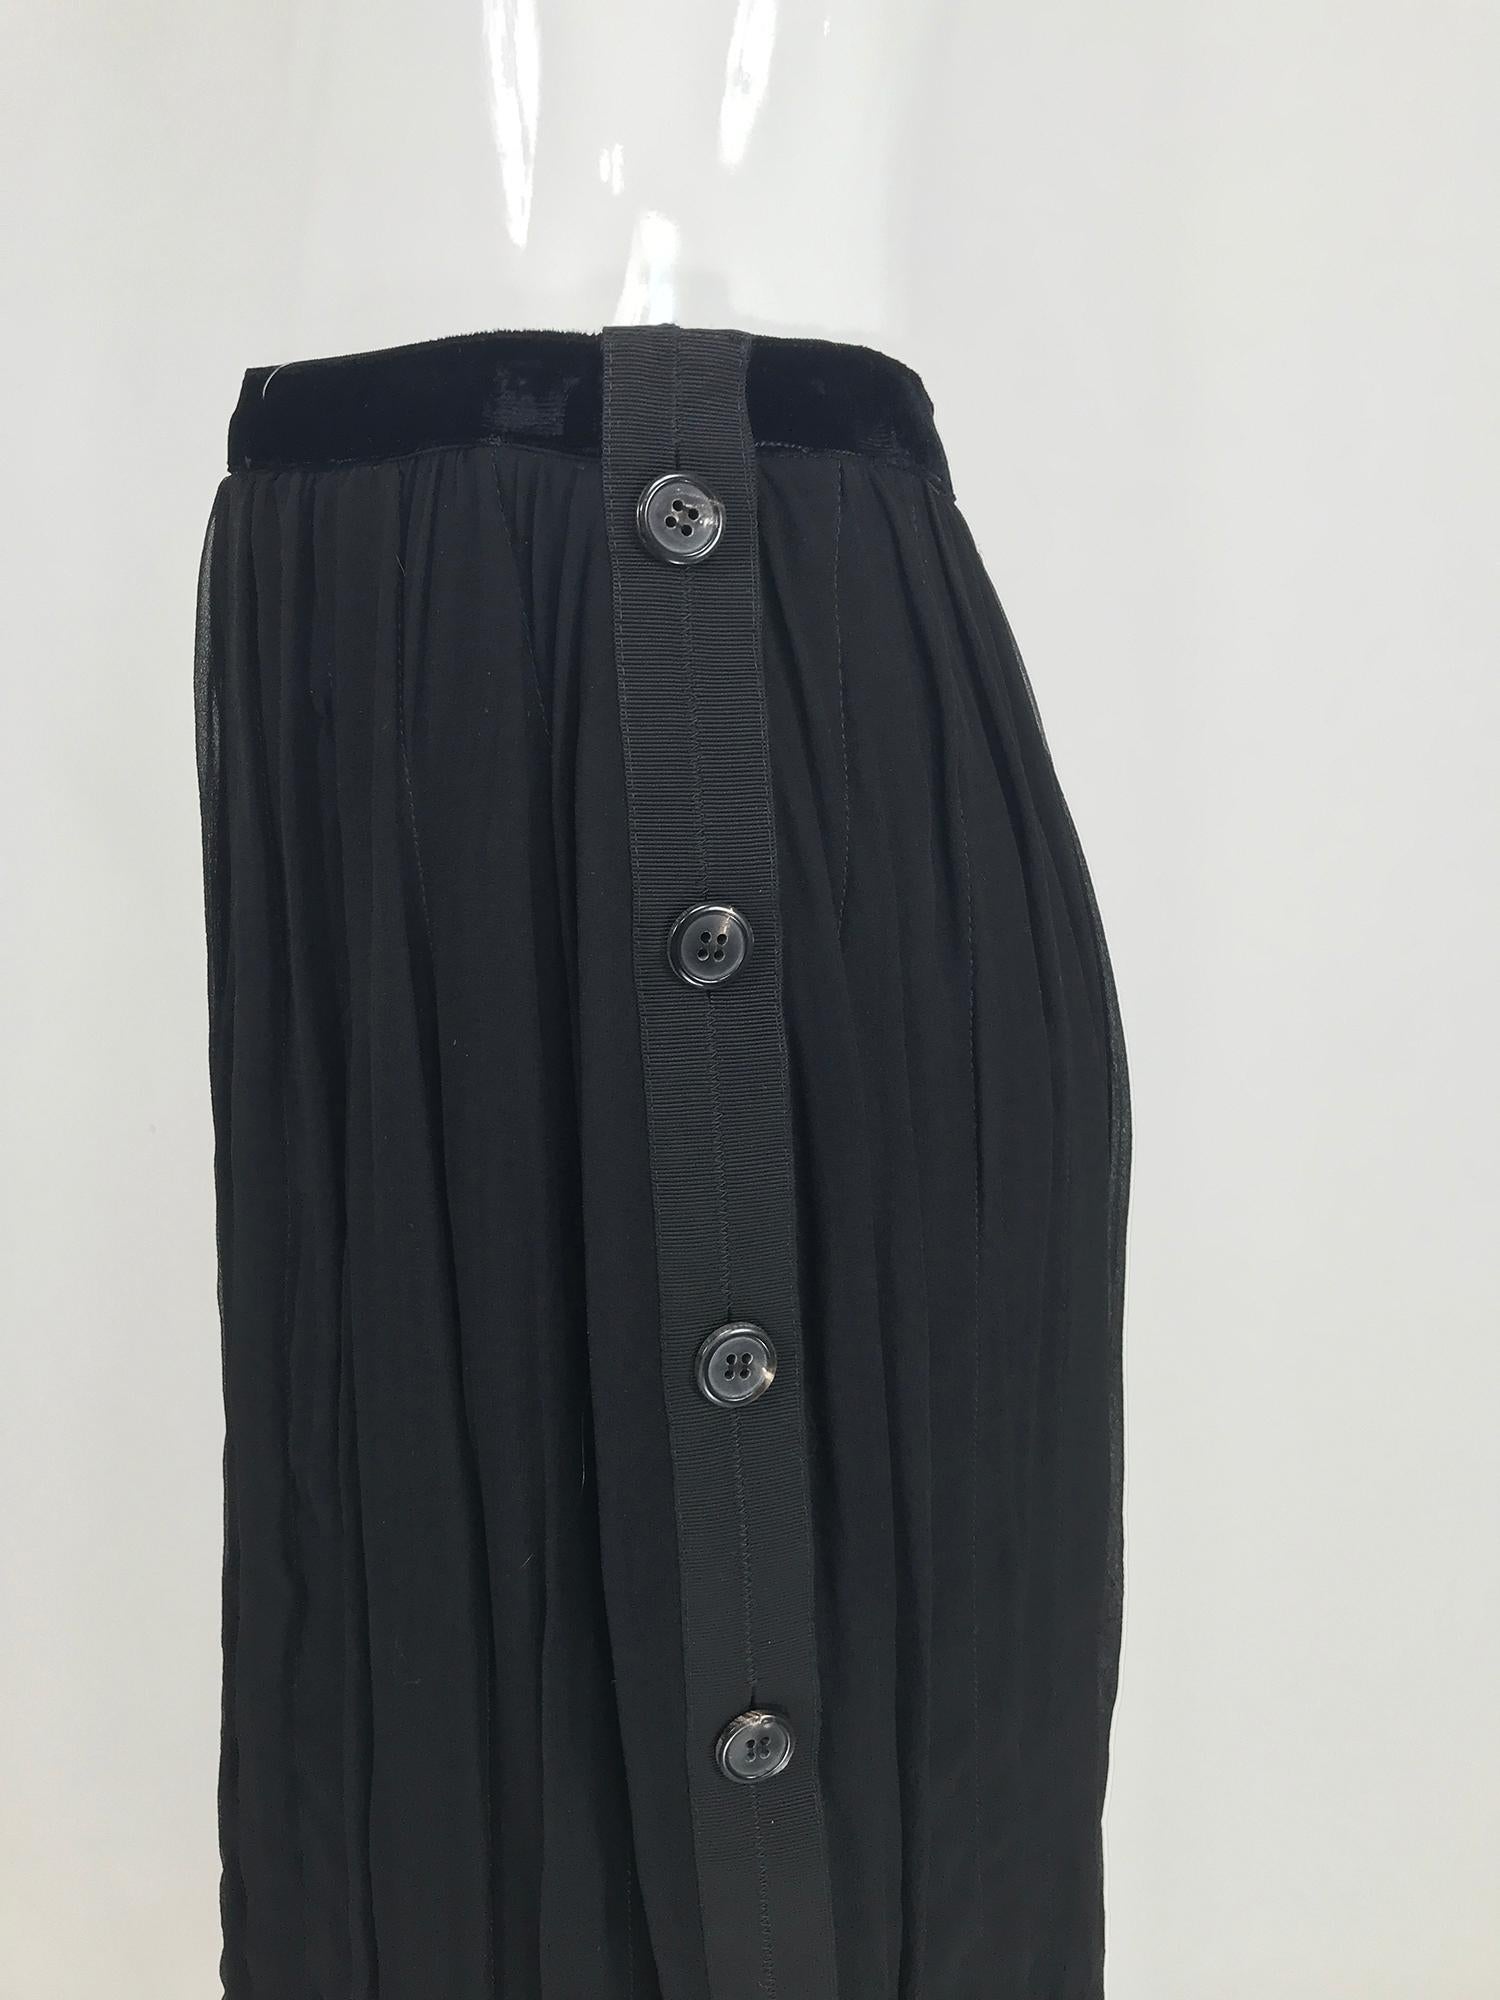 Lanvin Hiver 2006 Black Silk Skirt with Side Button Closure.  For Sale 3